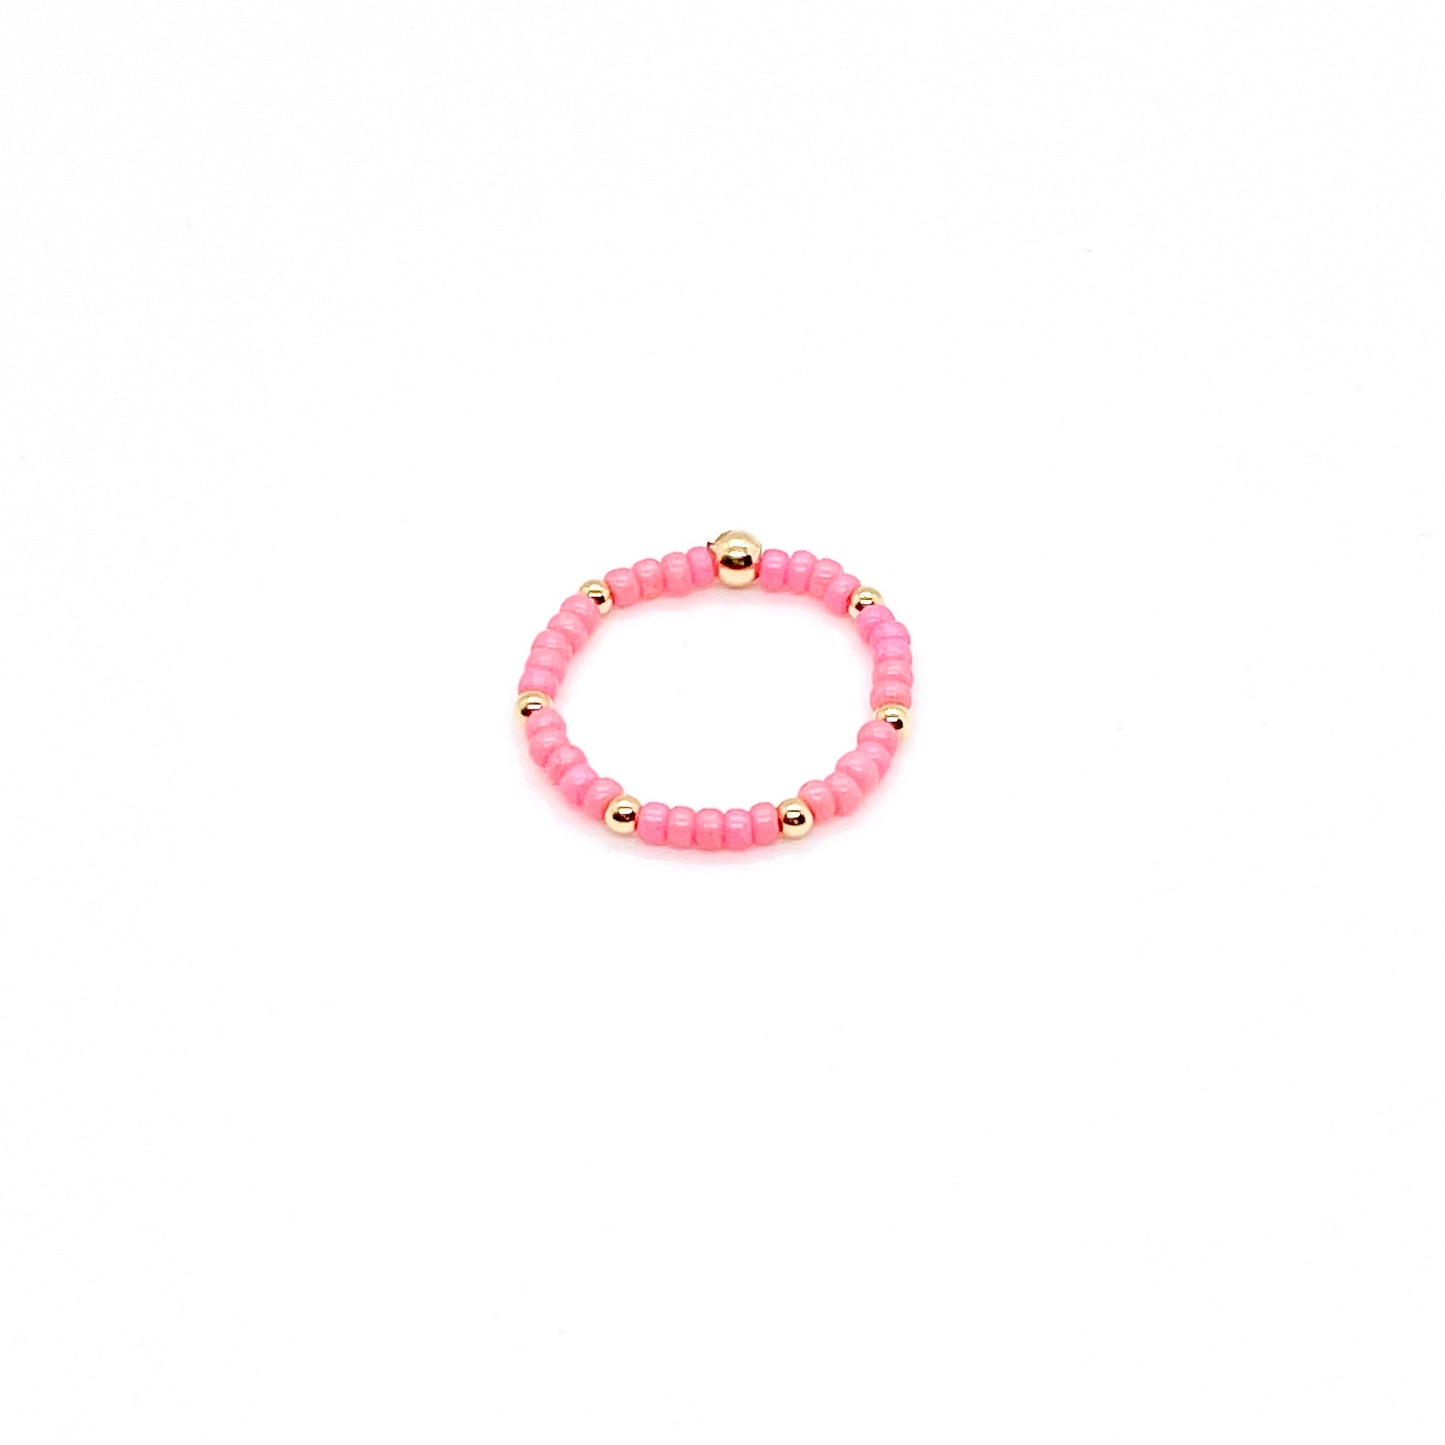 Stretch ring with pink seed beads and 2mm 14k gold-fill waterproof accent ball beads.